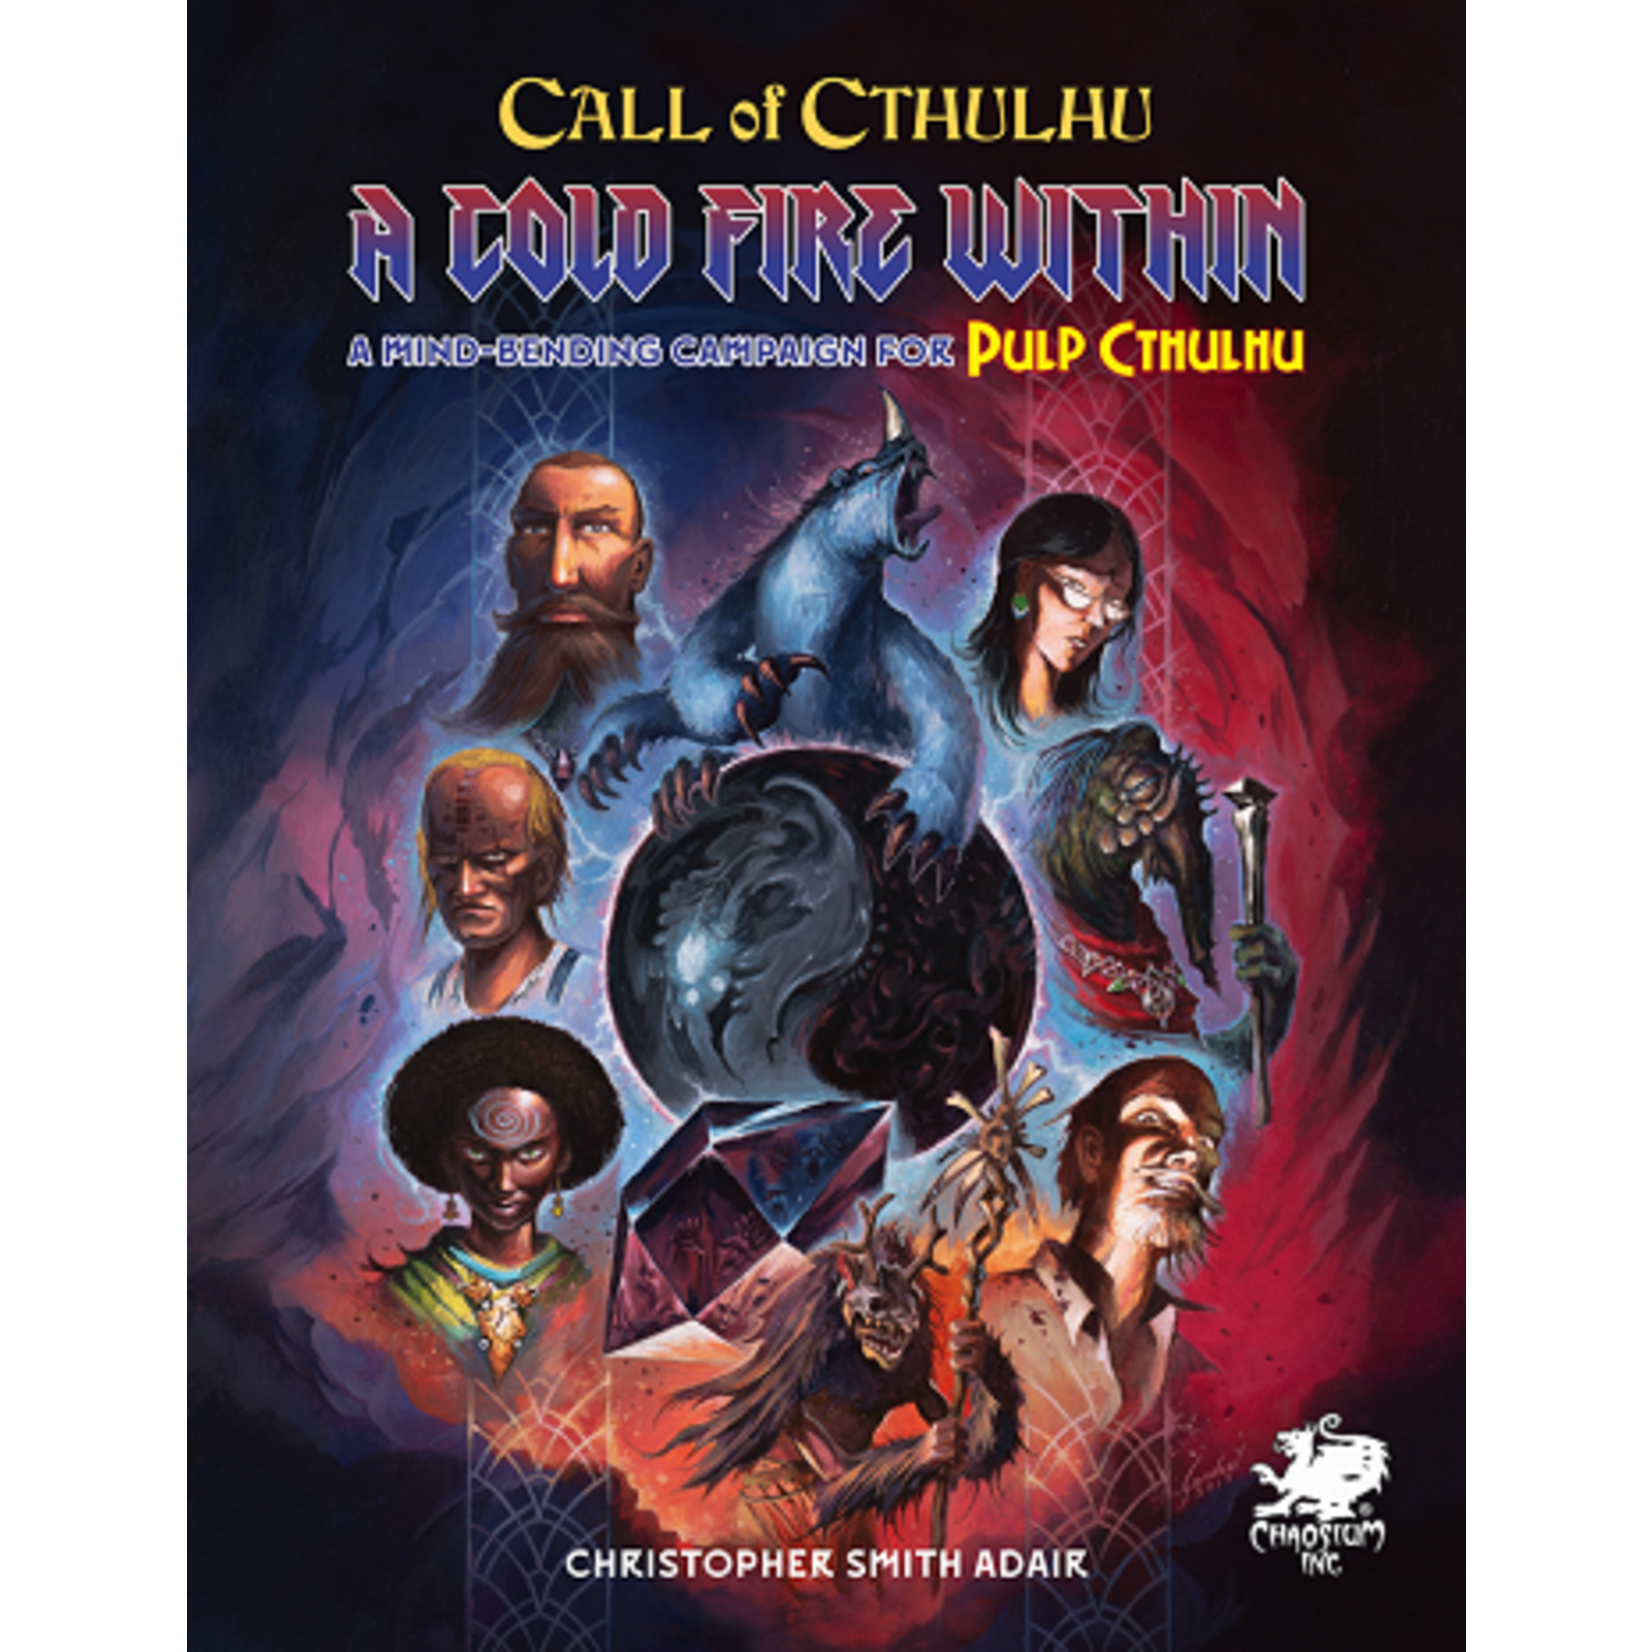 Call of Cthulhu Livre d'aventure pour Pulp Cthulhu - A Cold Fire within